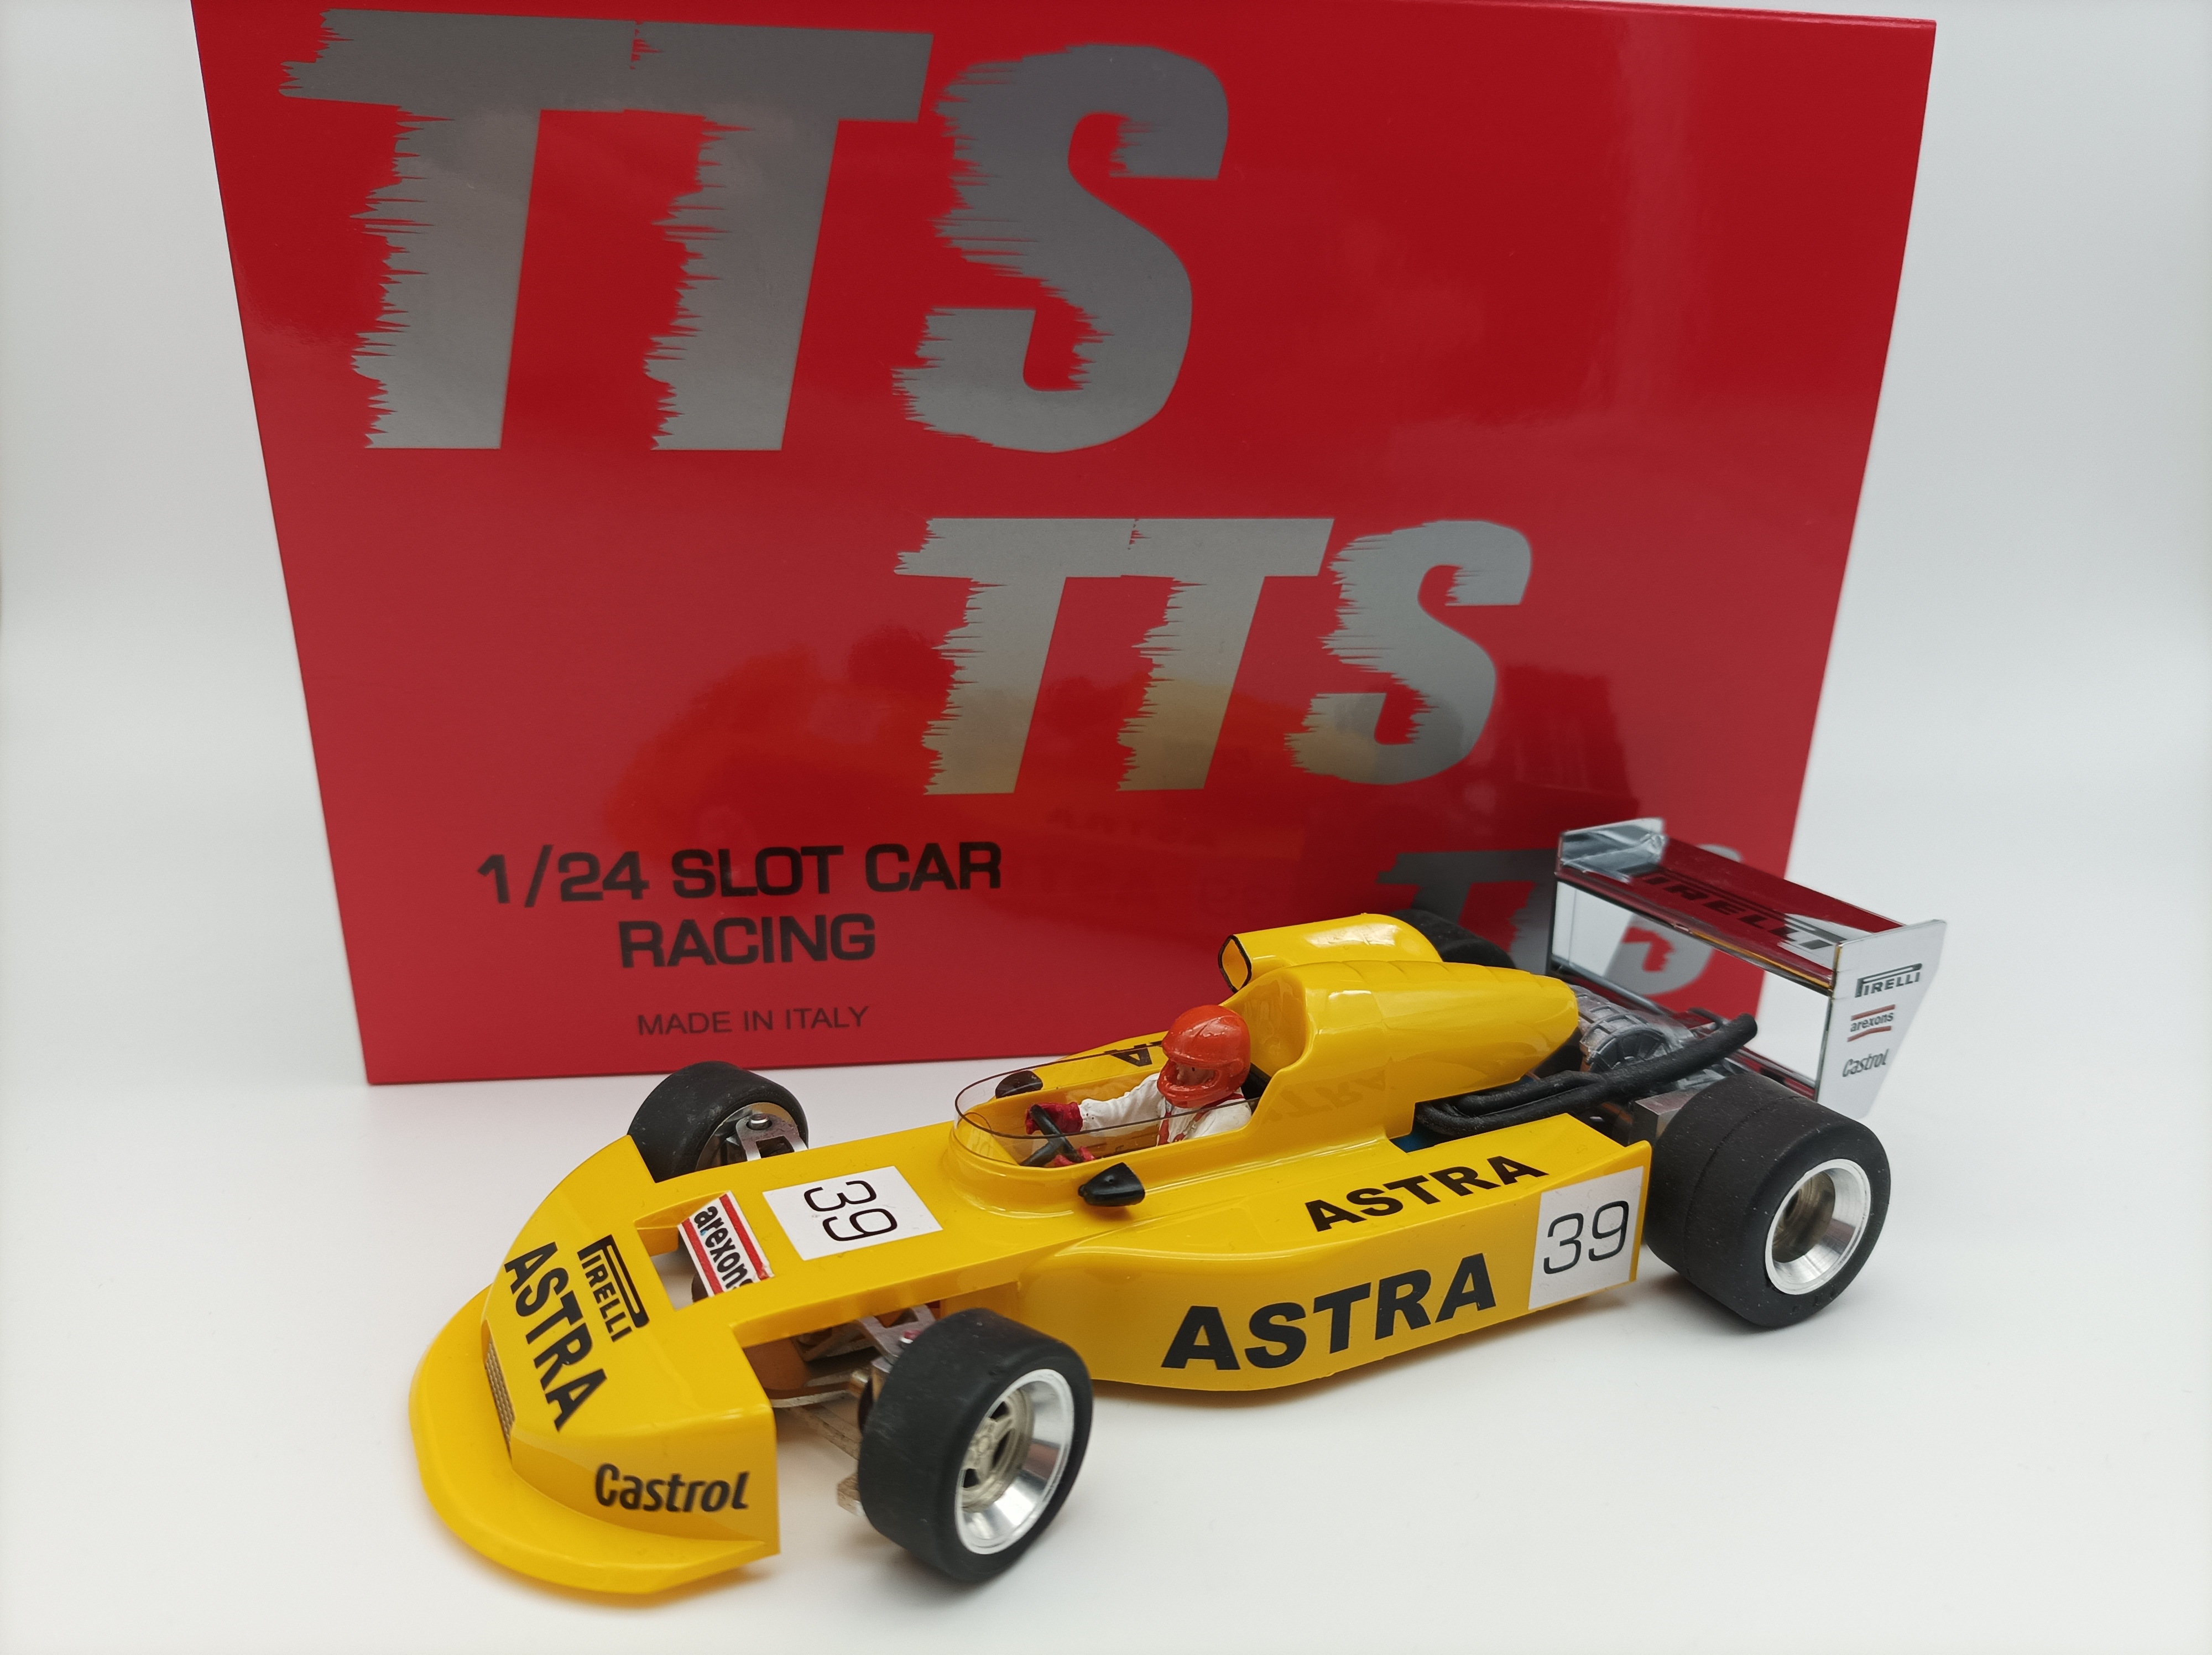 Tts Slot Cars rededuct